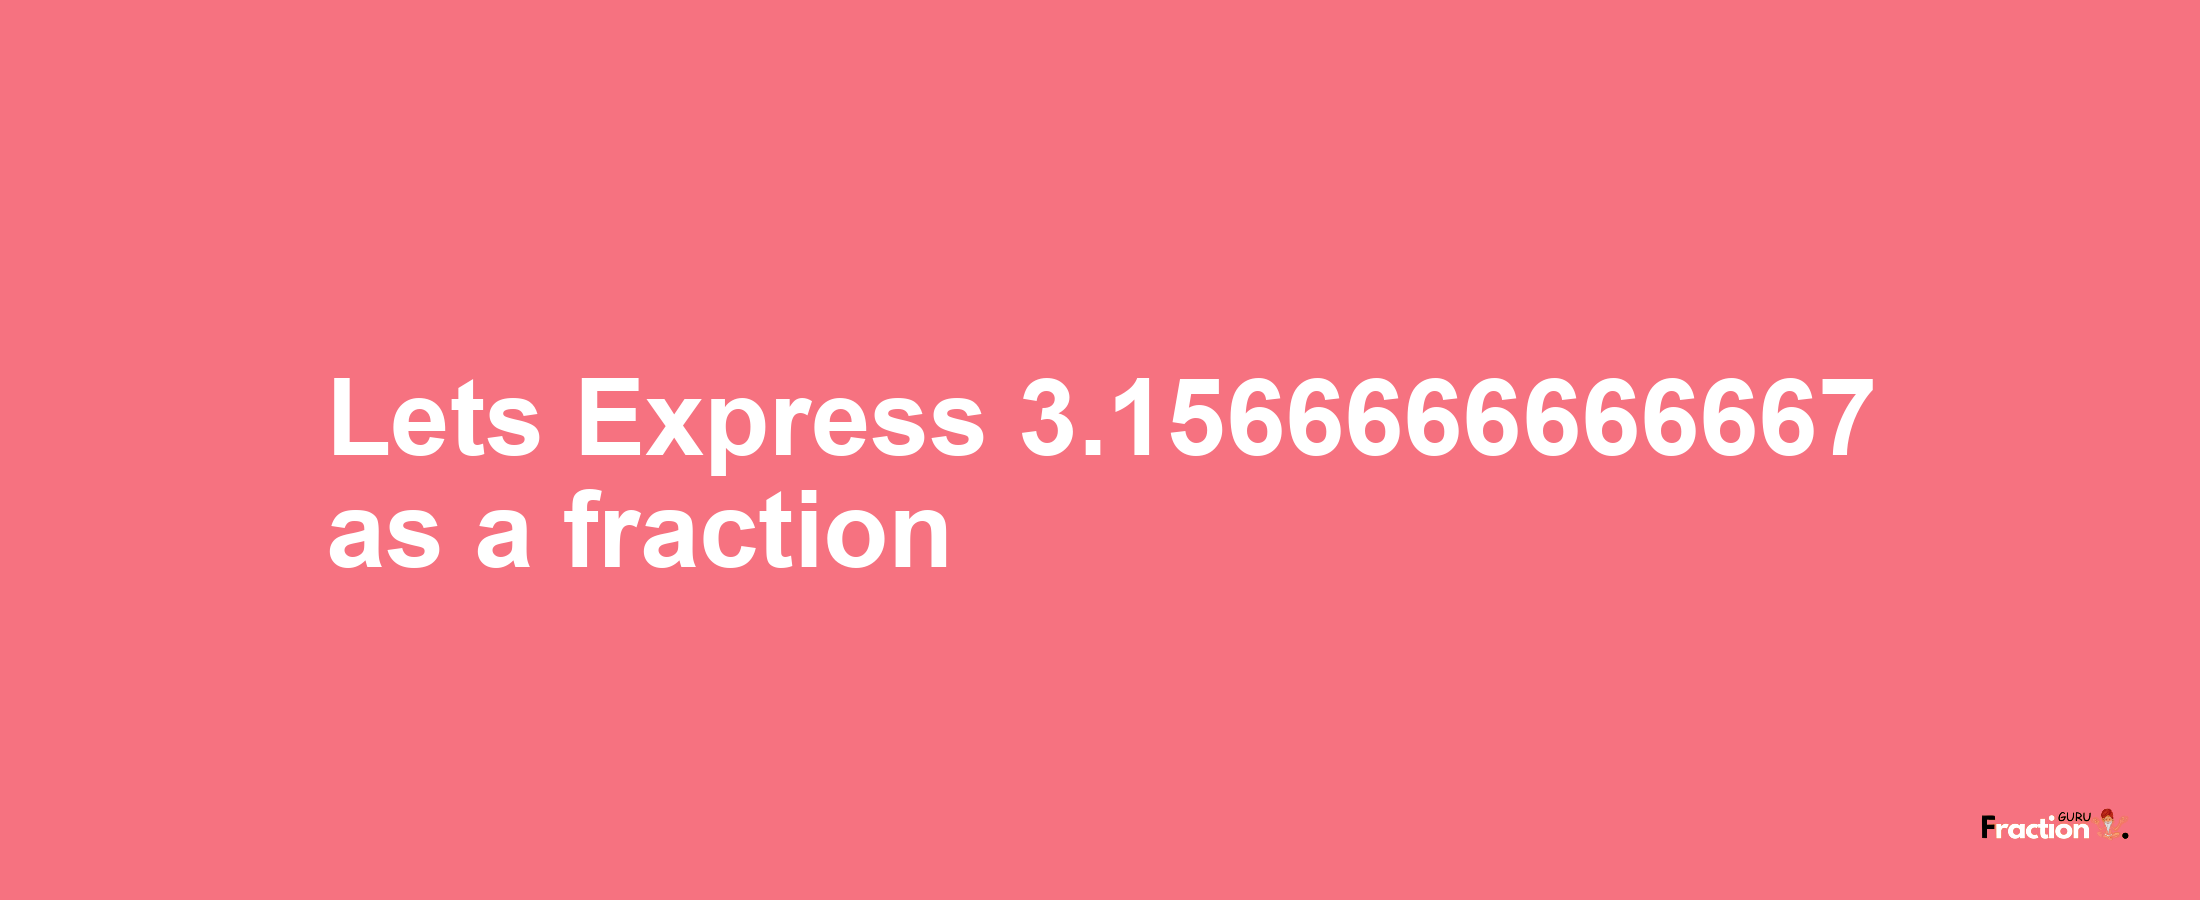 Lets Express 3.1566666666667 as afraction